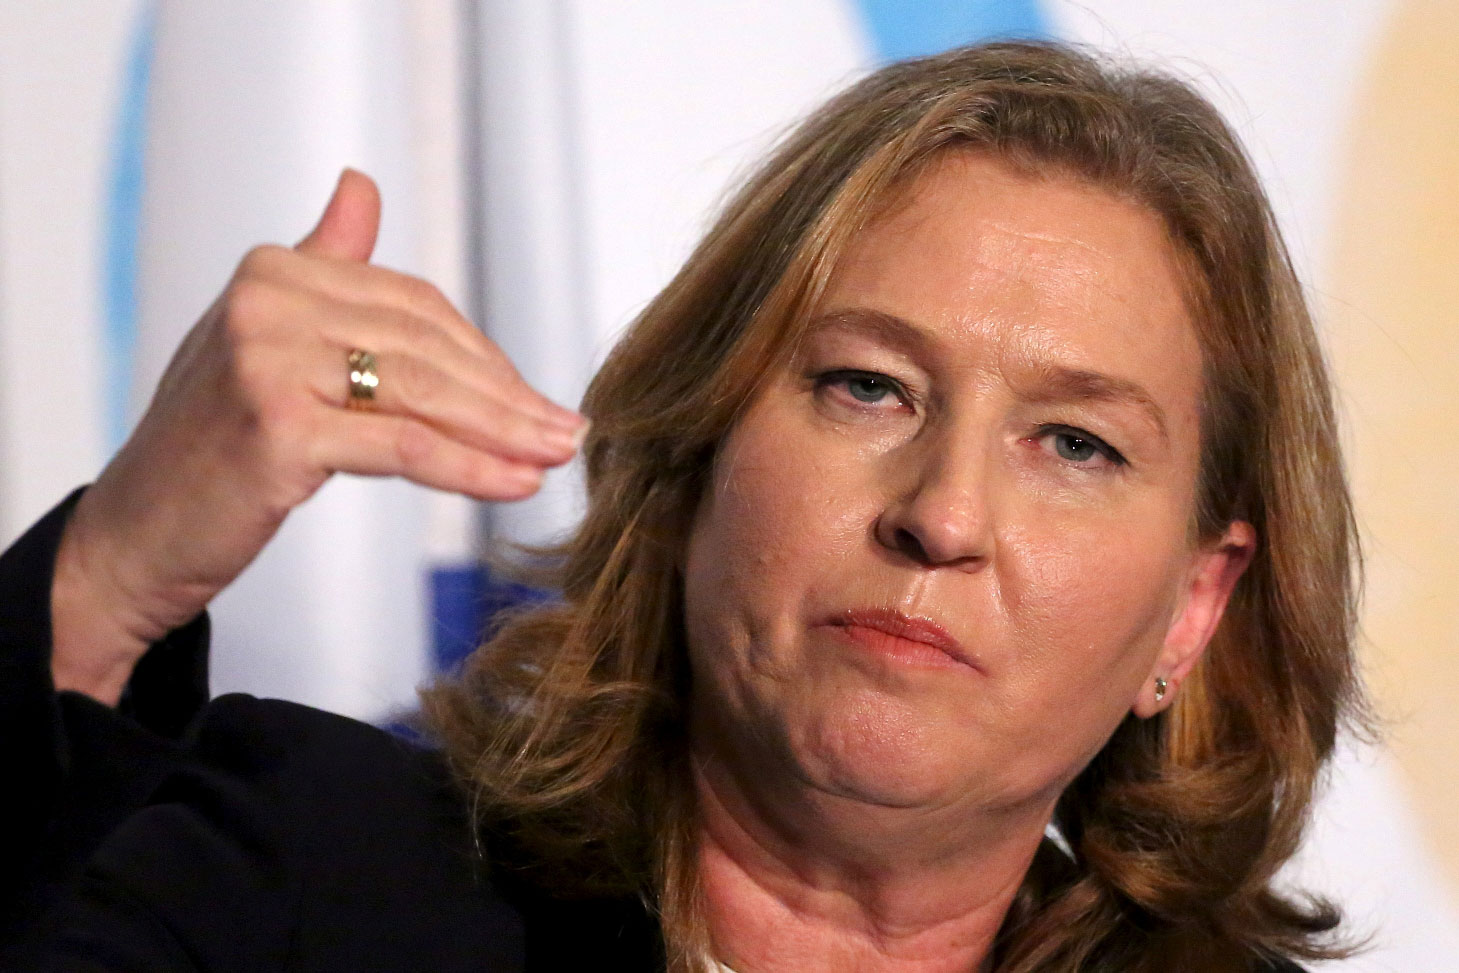 Former Israeli Foreign Minister Tzipi Livni of the Zionist Union addresses attendees at the "Haaretz Q: with New Israel Fund" event at The Roosevelt Hotel in the Manhattan borough of New York City, December 13, 2015.